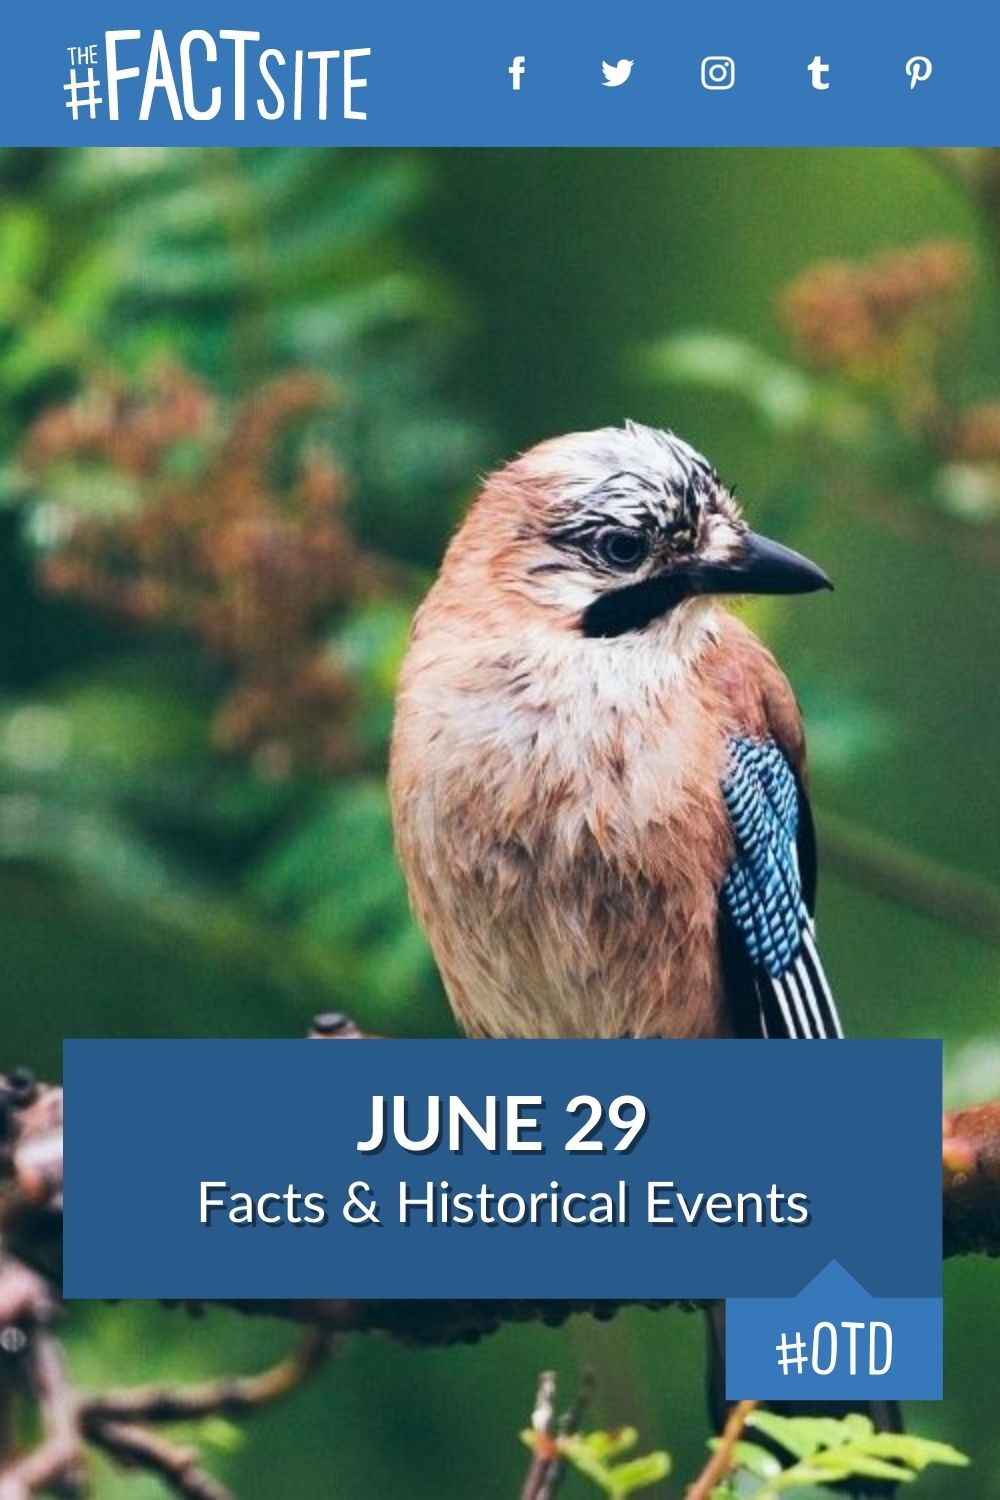 Facts & Historic Events That Happened on June 29